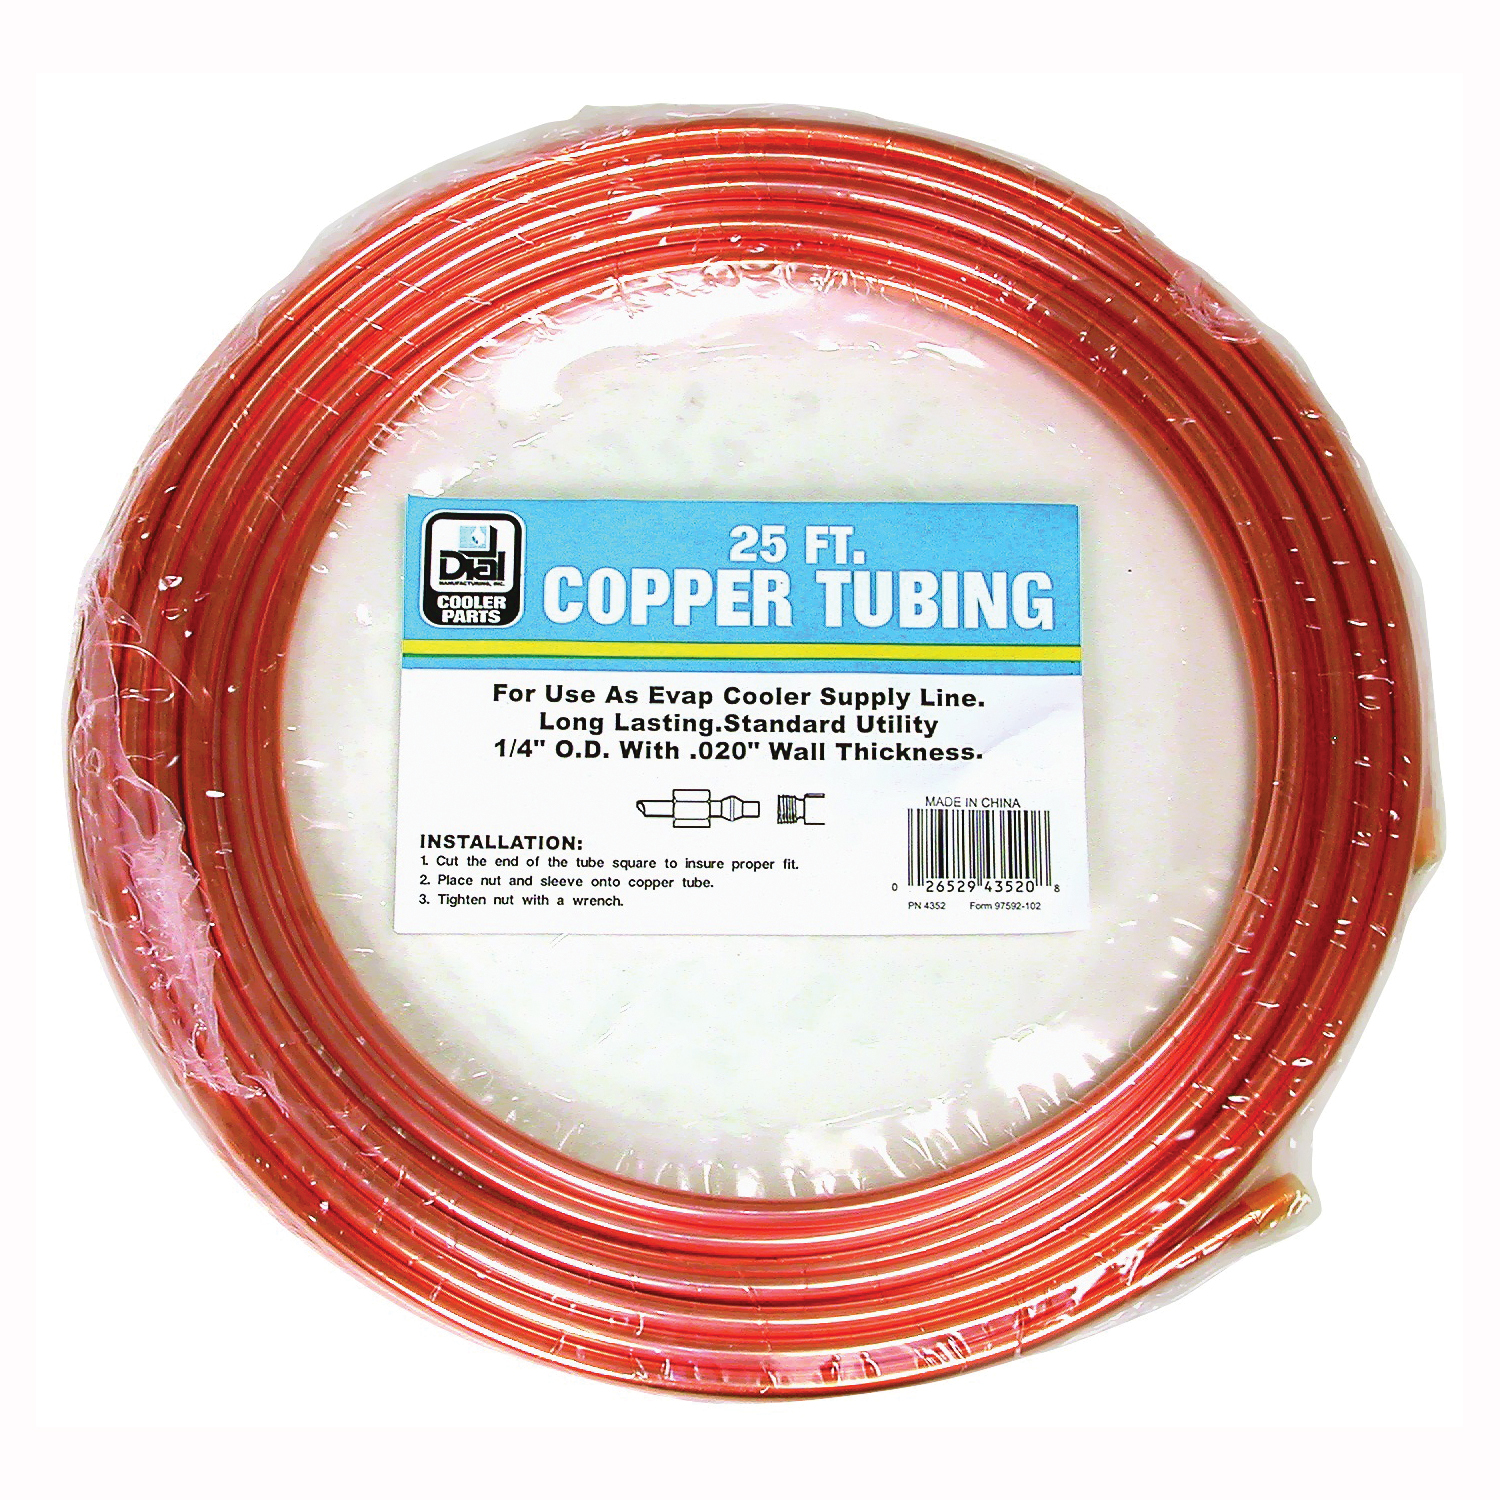 4352 Cooler Tubing, Copper, For: Evaporative Cooler Purge Systems